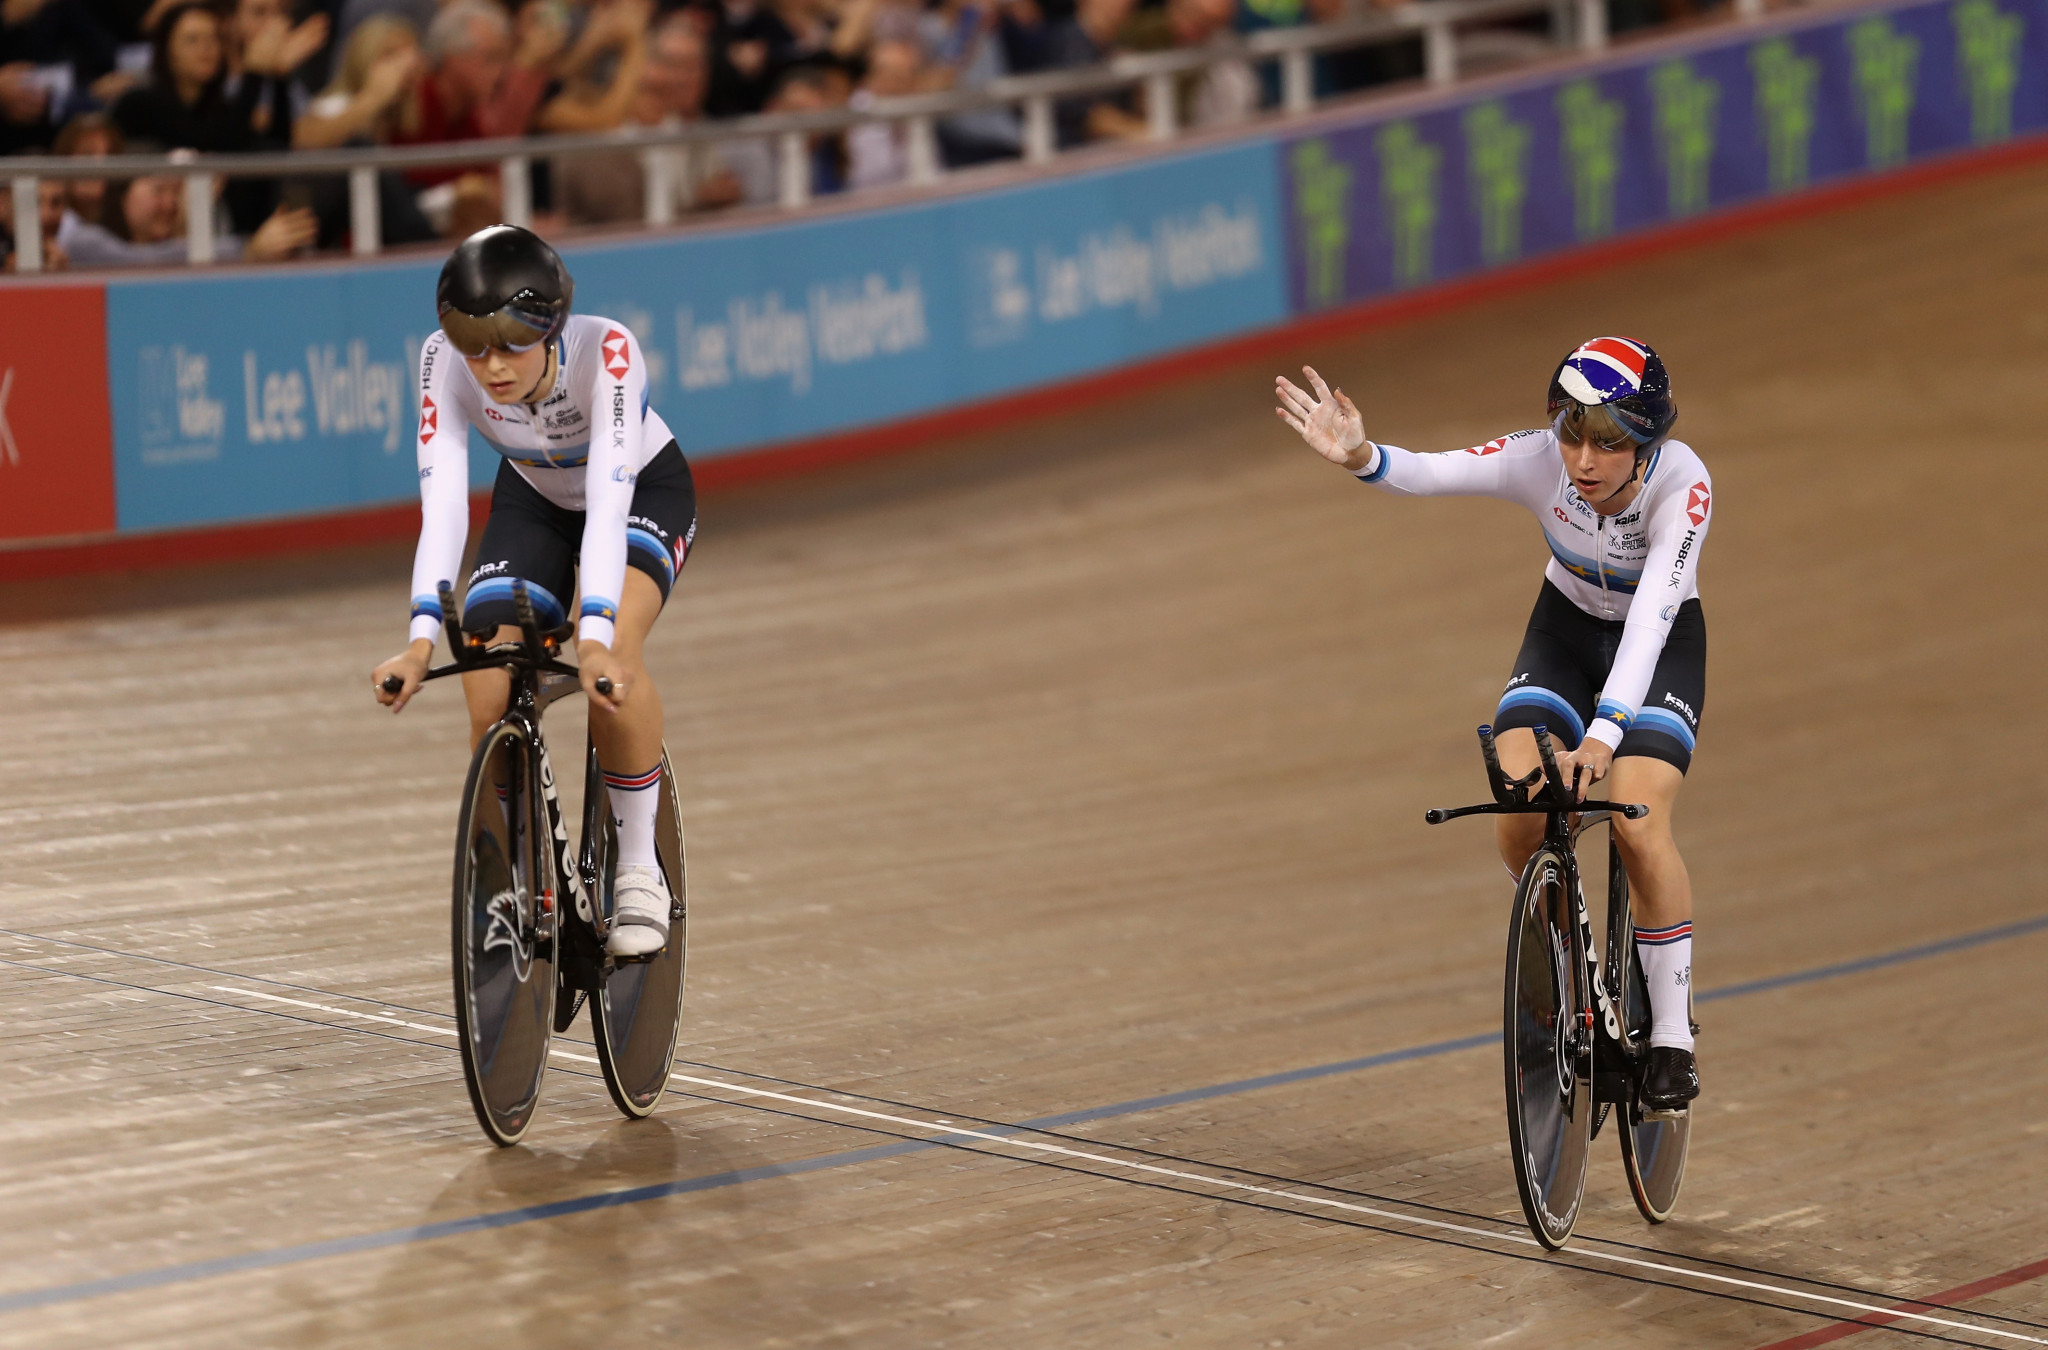 Britain won the women's team pursuit event on the opening day of the UCI Track Cycling World Cup in London ©Getty Images